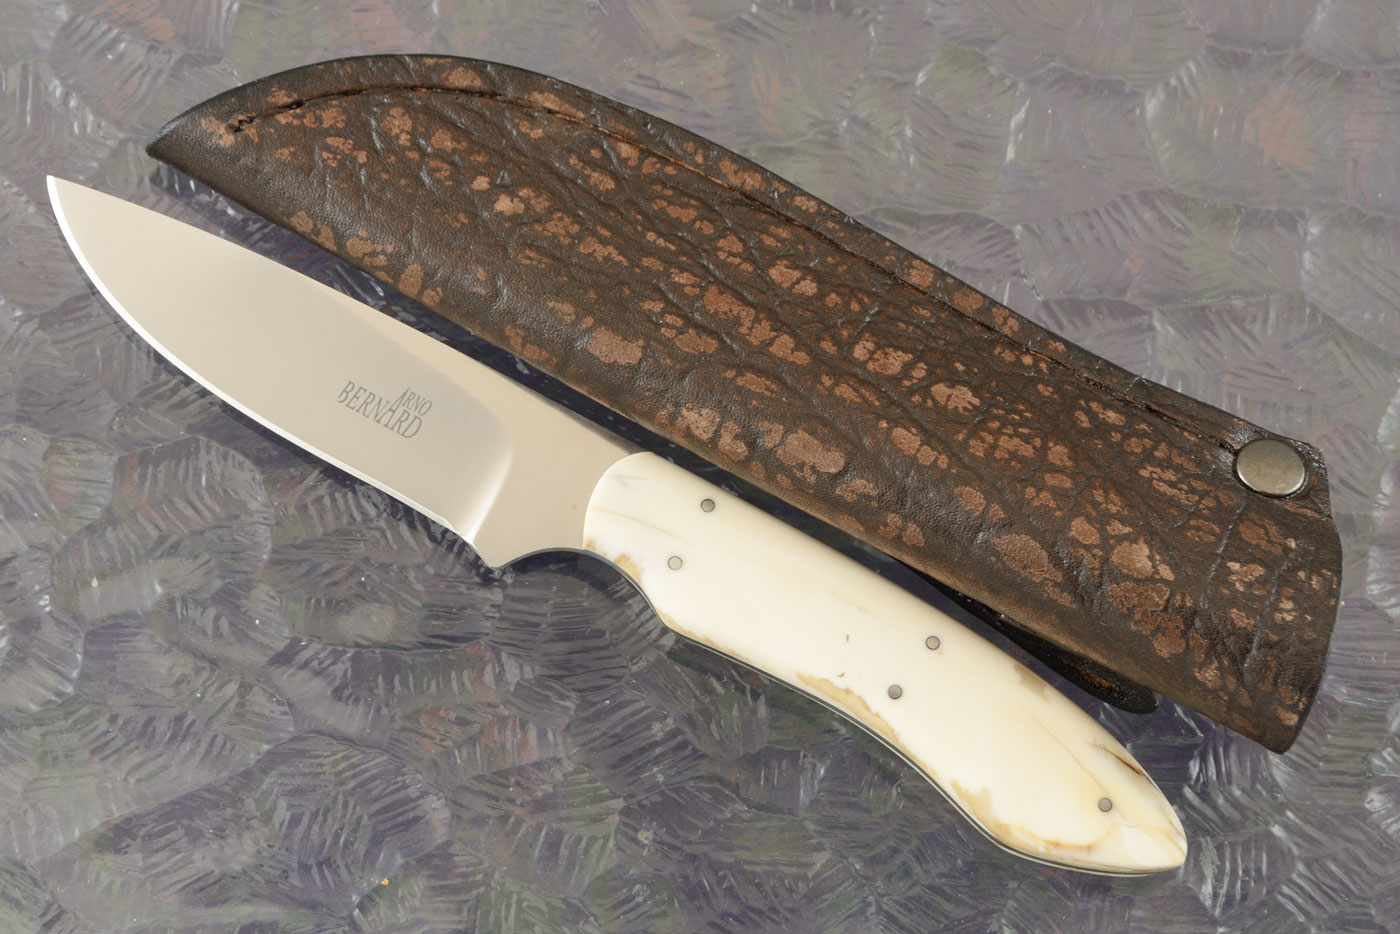 Utility/Hunter with Warthog Tusk - S35VN